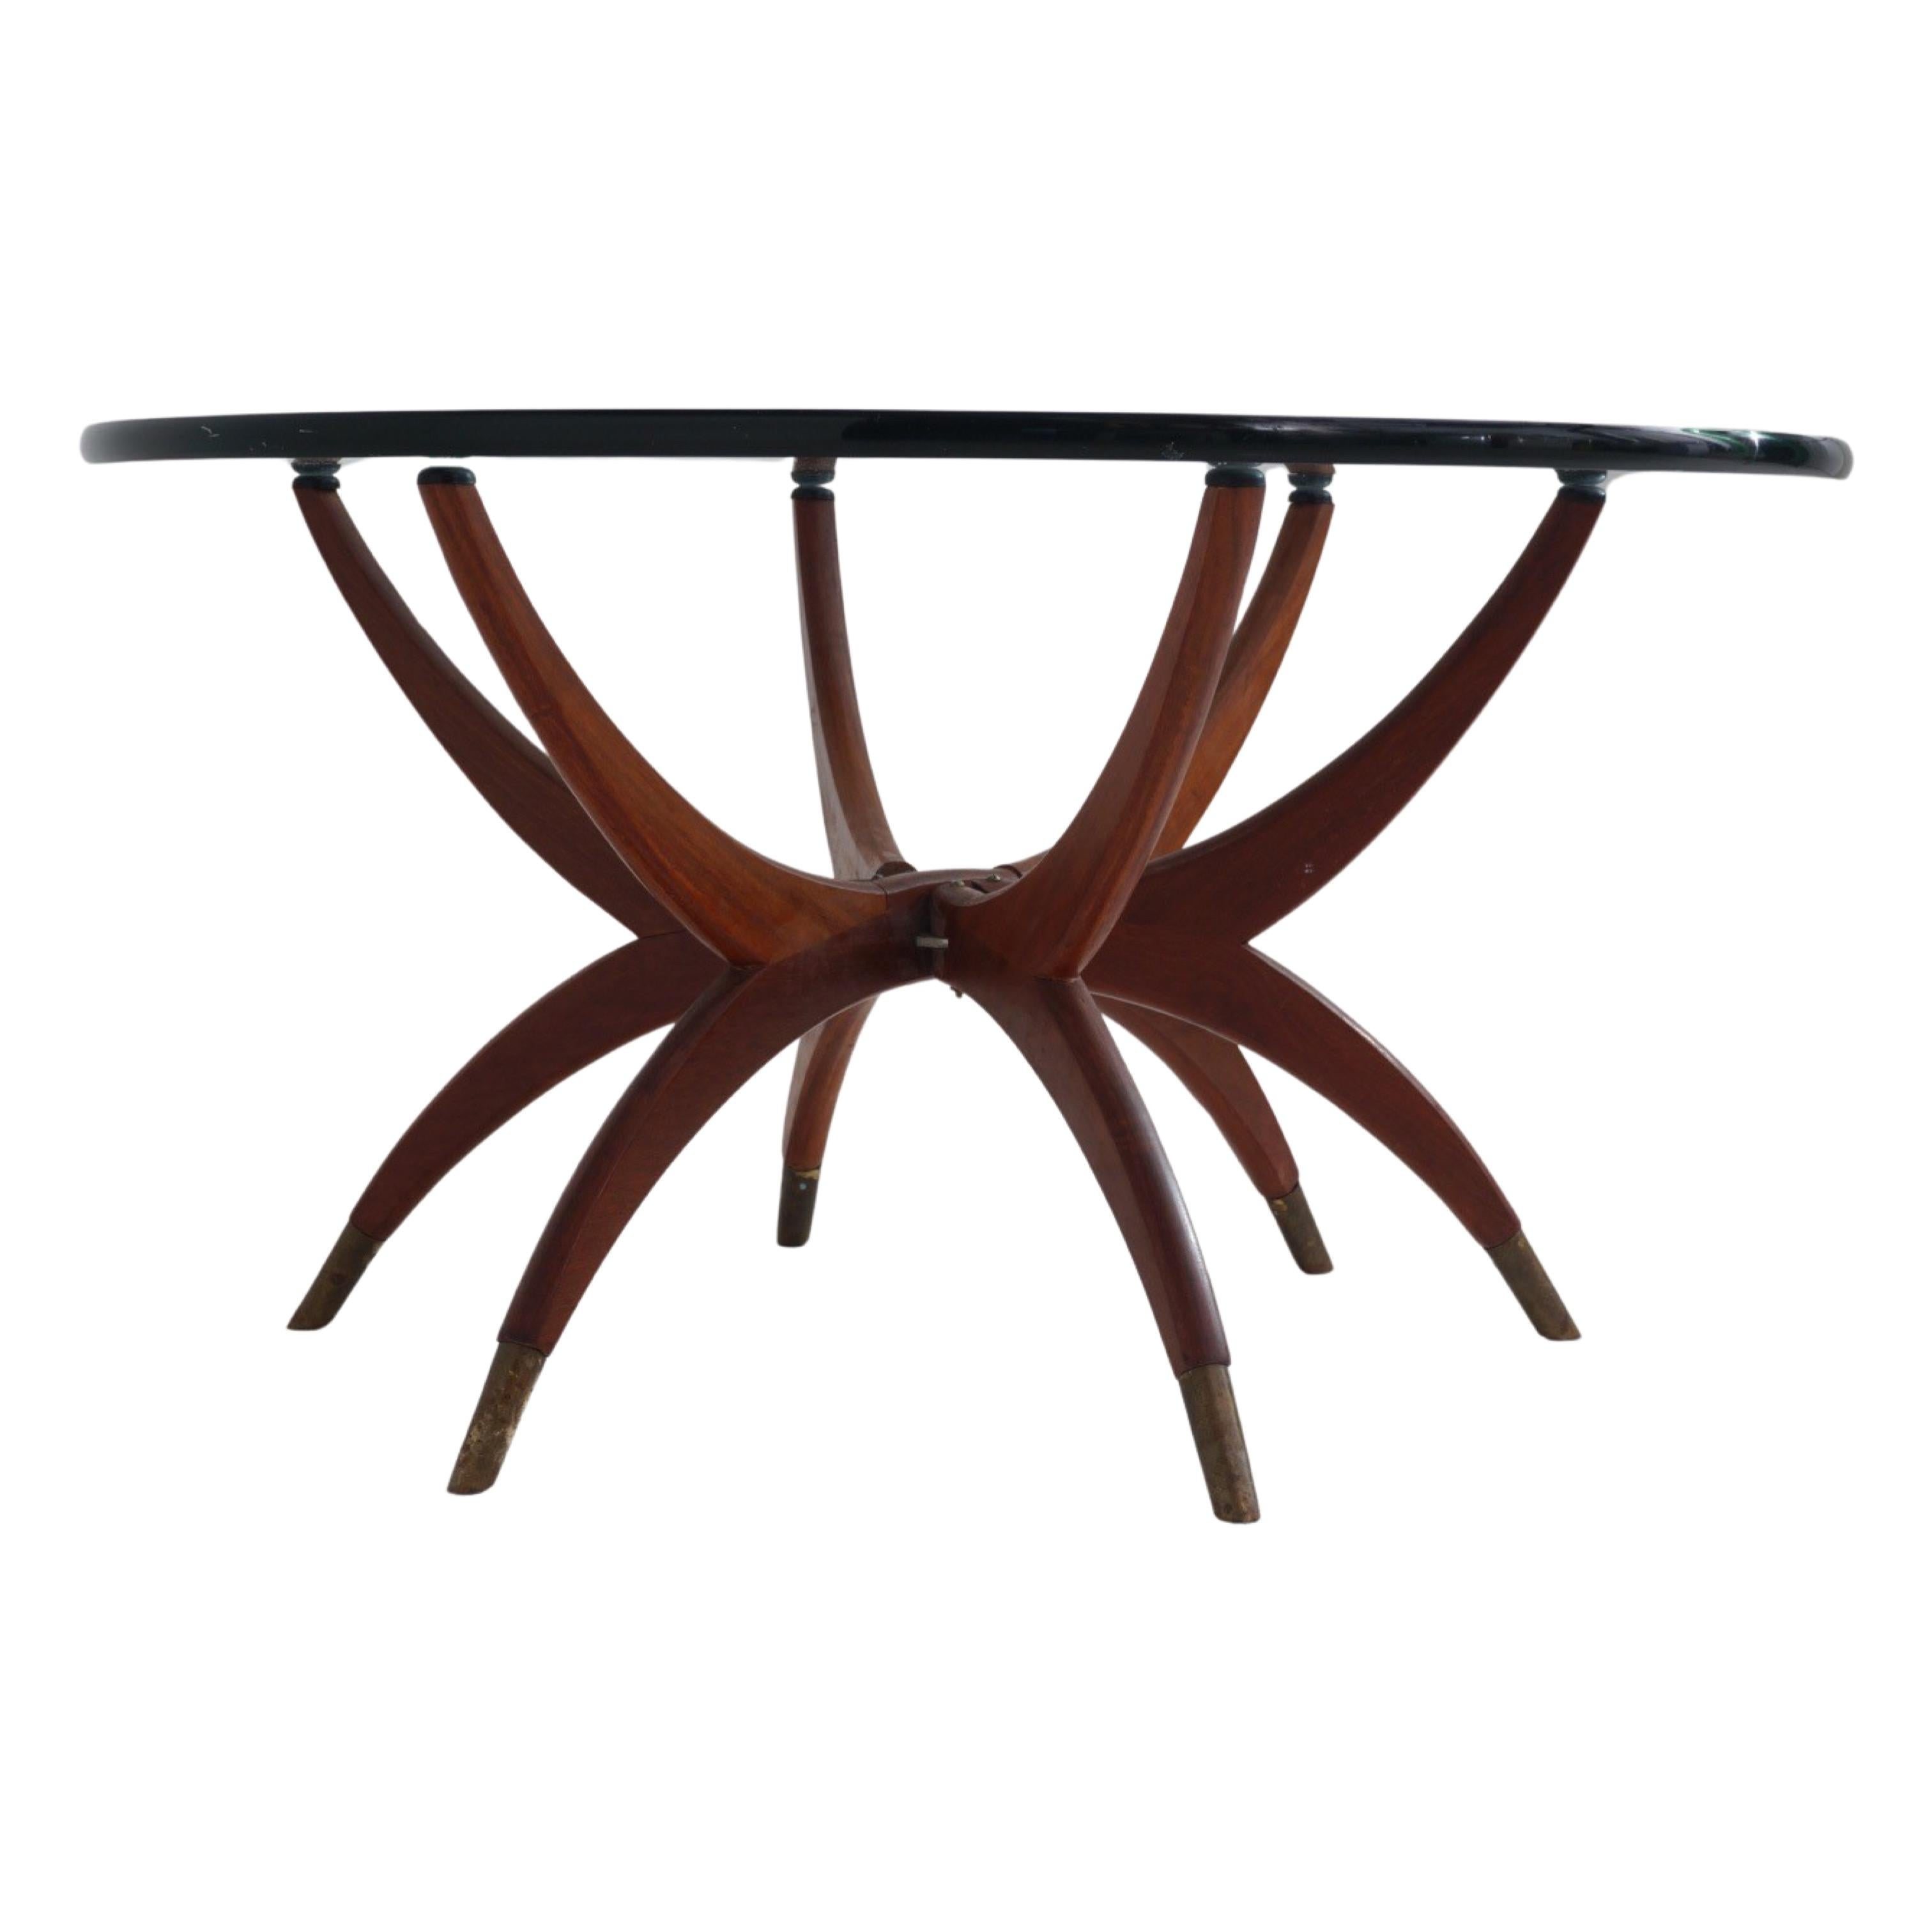 This is not your average coffee table. With legs like spider limbs dipped in a deep patina brass, it's has the ultimate in cool Mid-Century Modern vibes. A thick round glass top perches atop the foldable walnut base. Need to clear the living room in